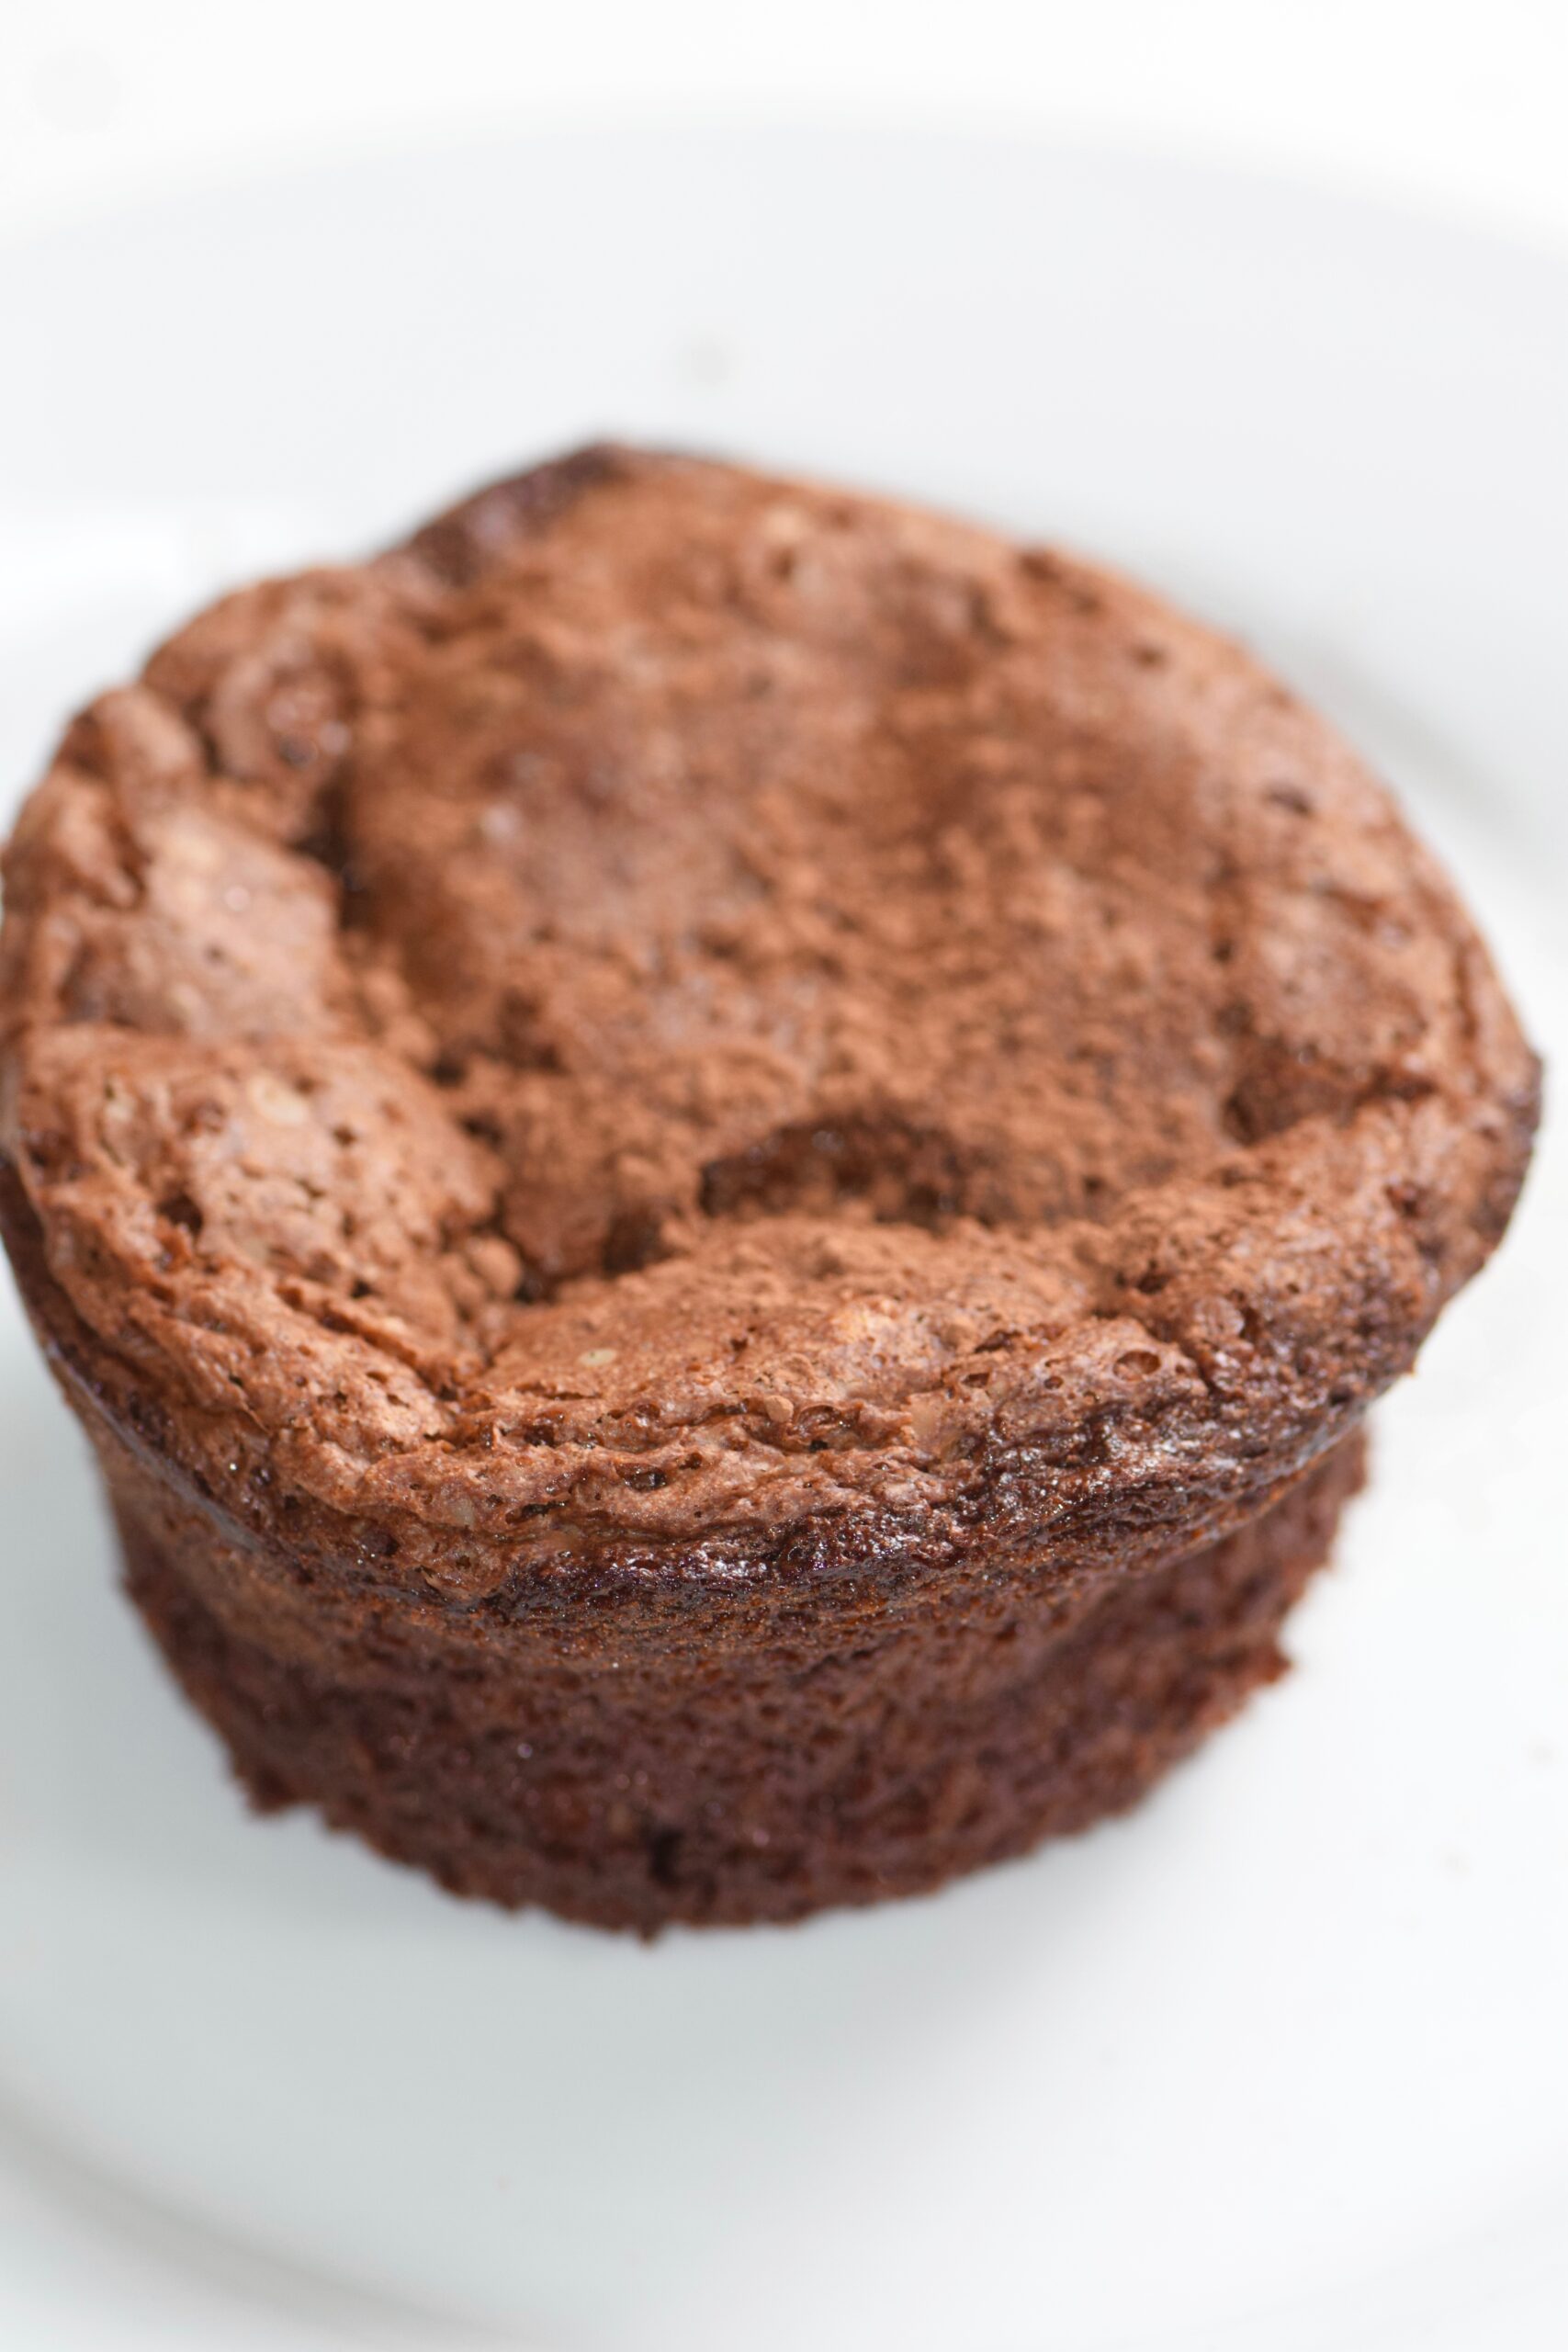 Flourless chocolate cake with cocoa powder